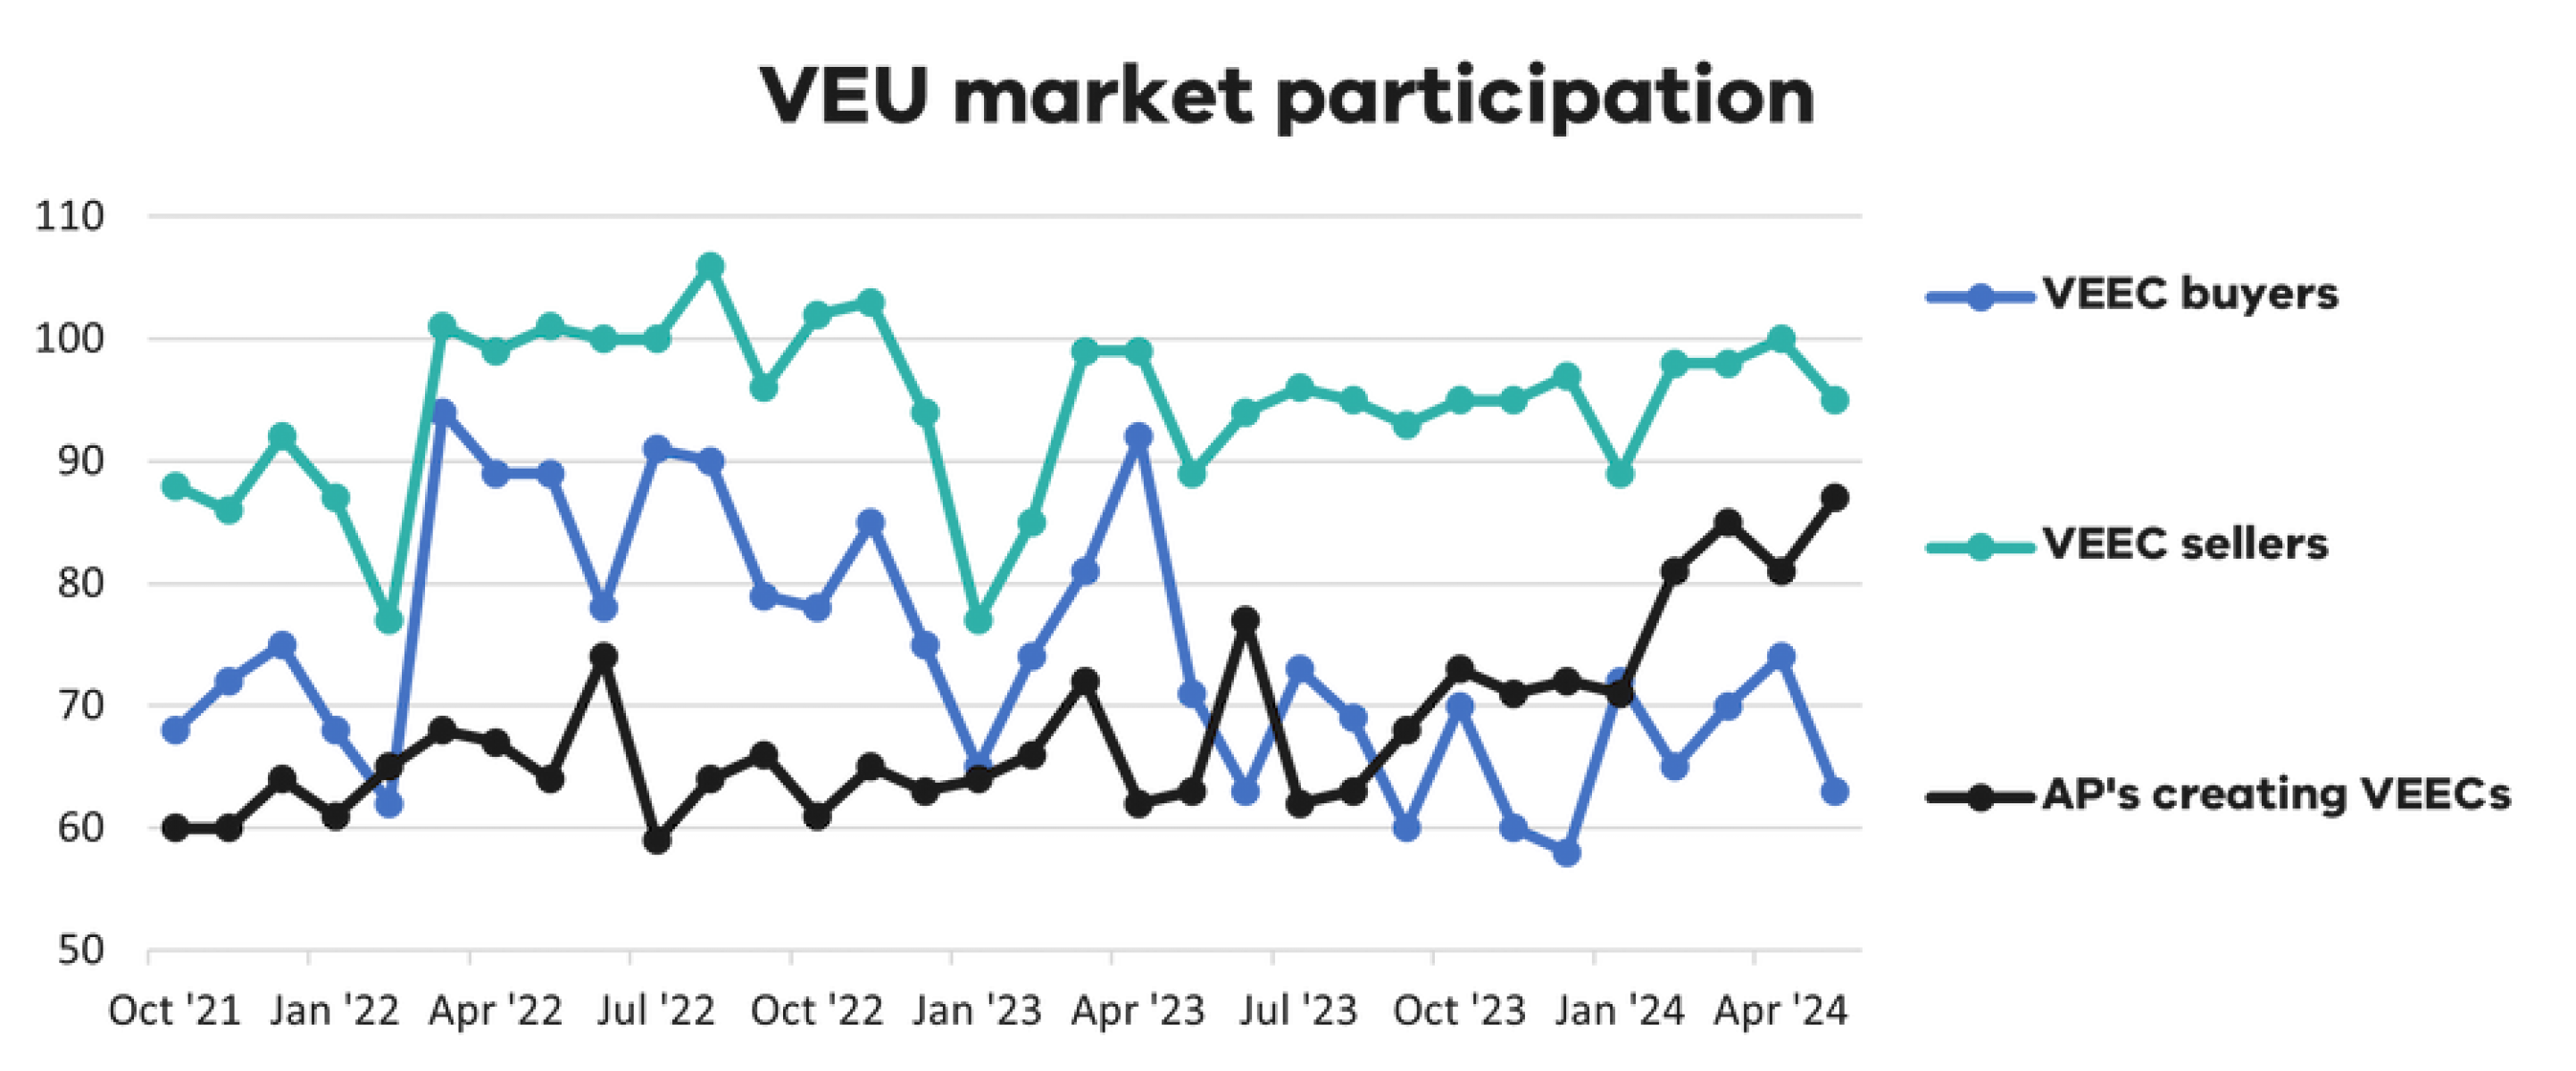 A graph showing the number of market participants in the VEU program